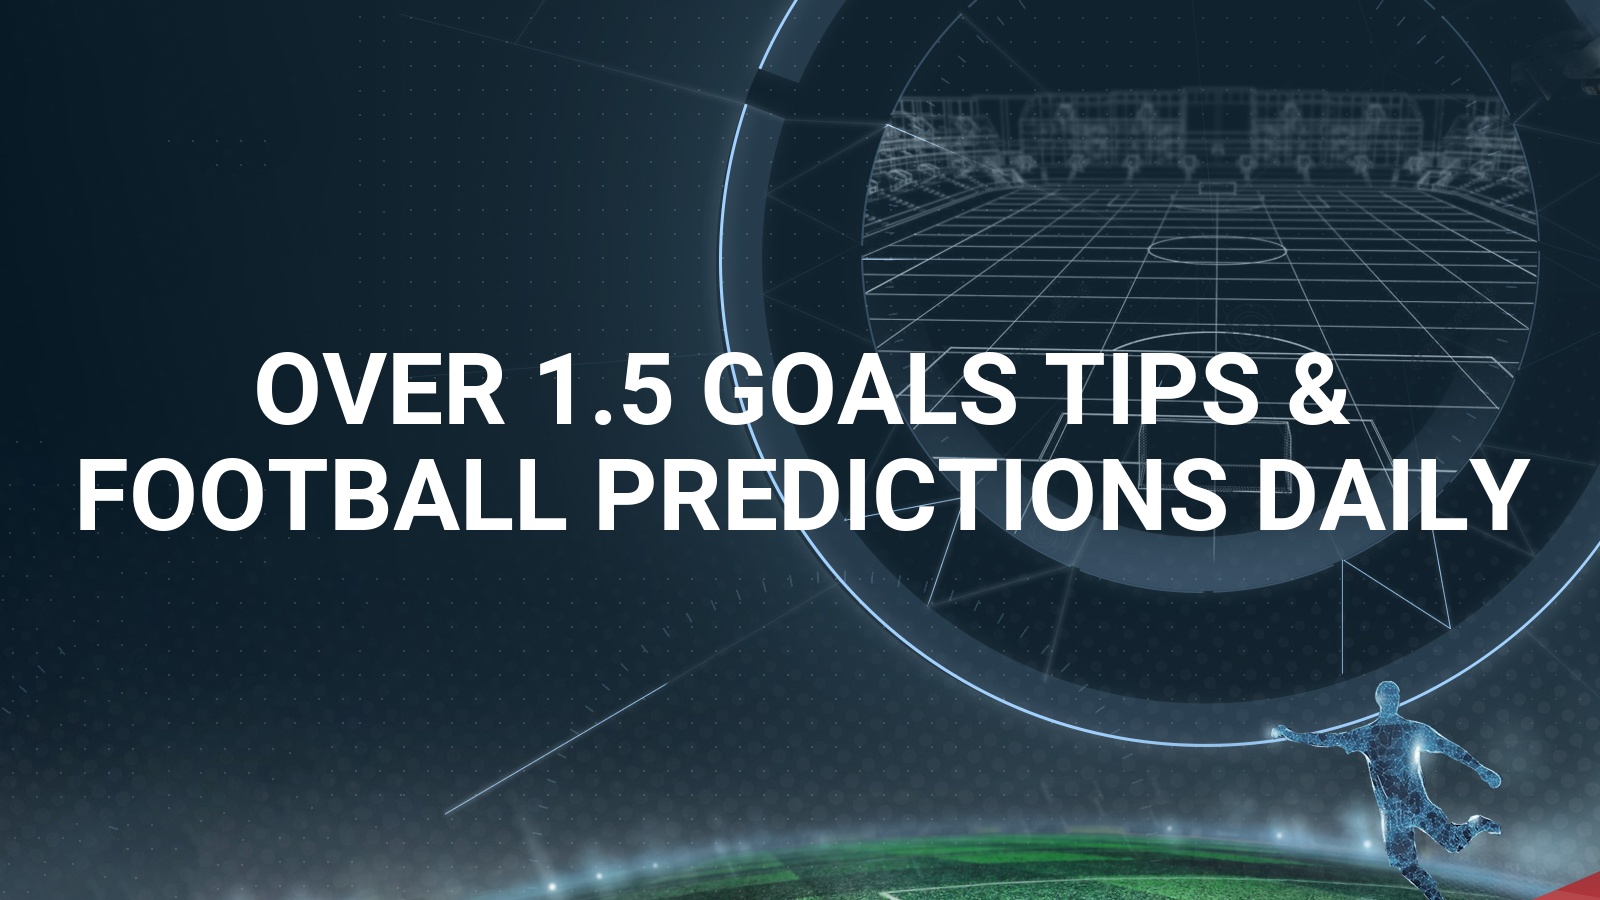 Which site is reliable for football predictions over 1.5?